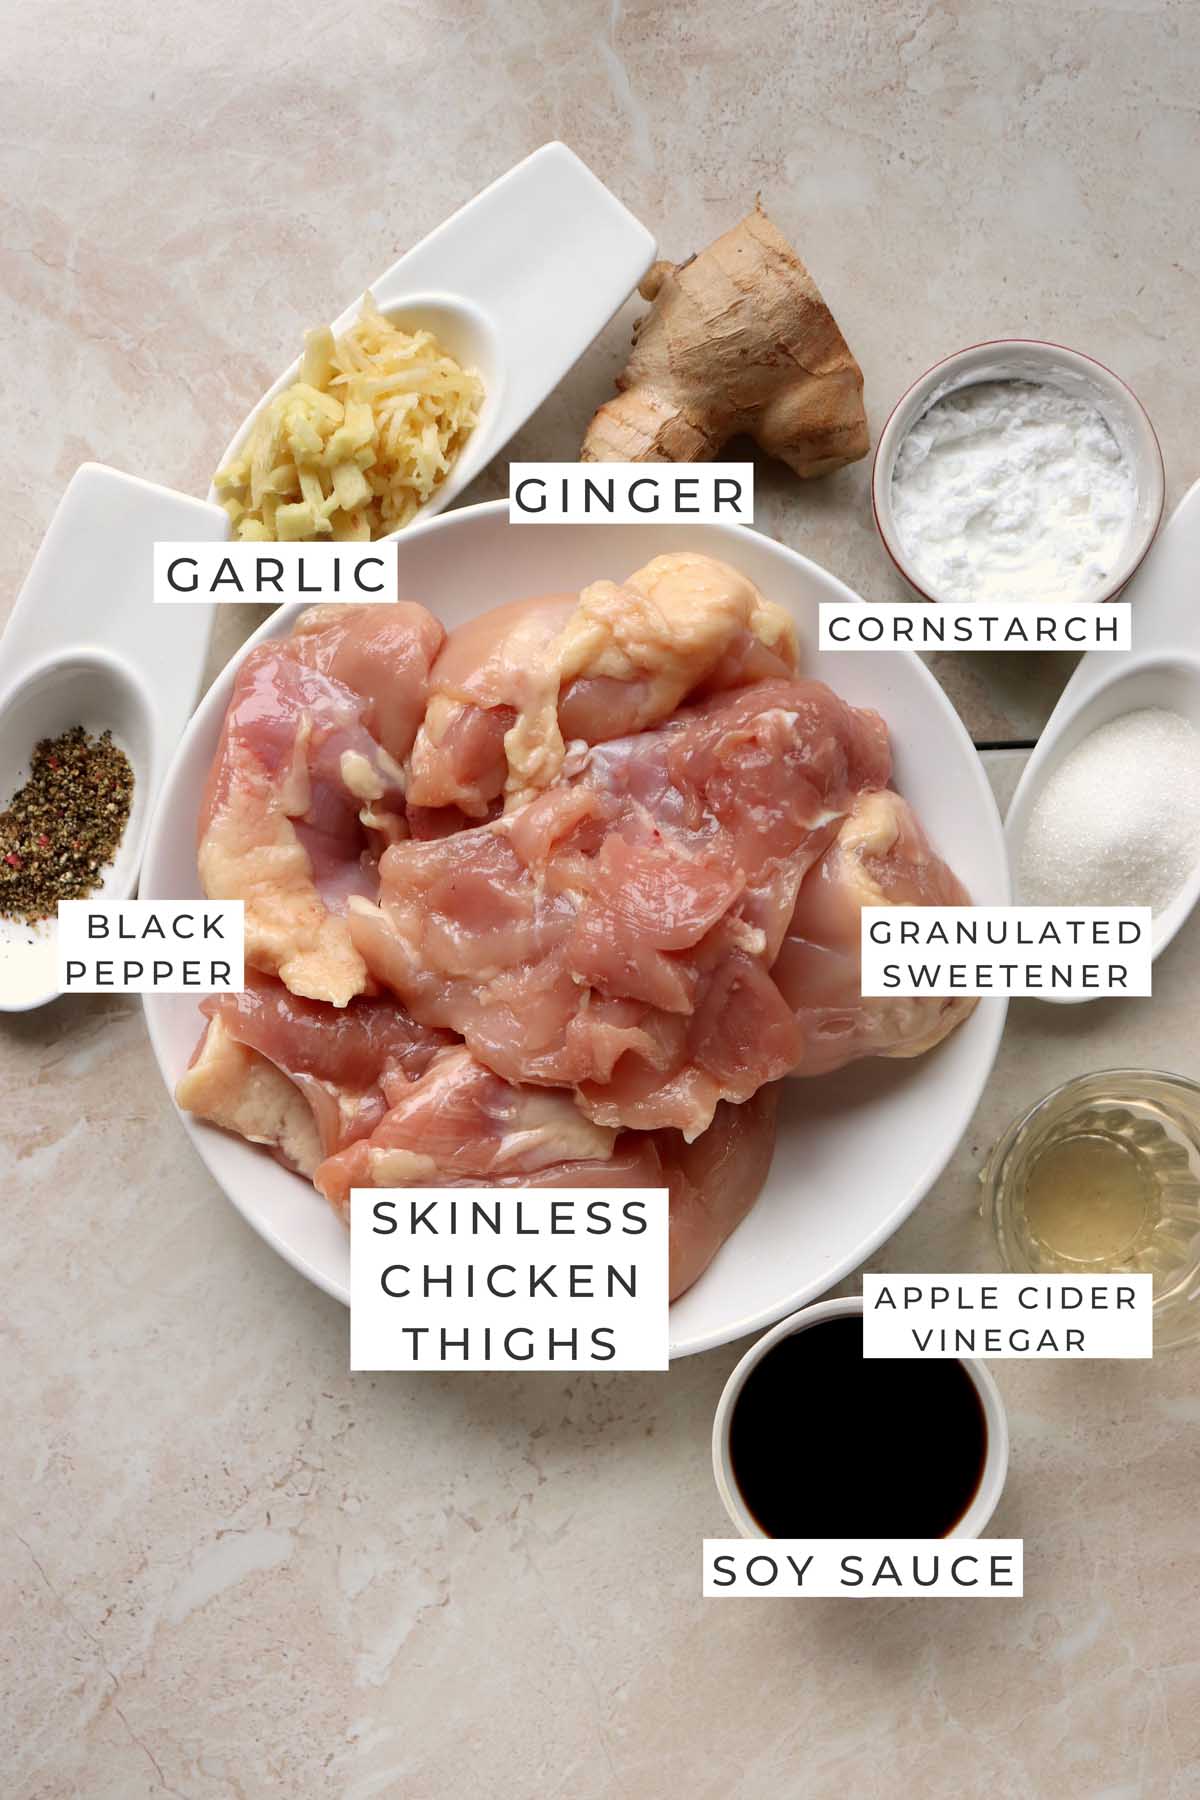 Labeled ingredients for the teriyaki chicken.